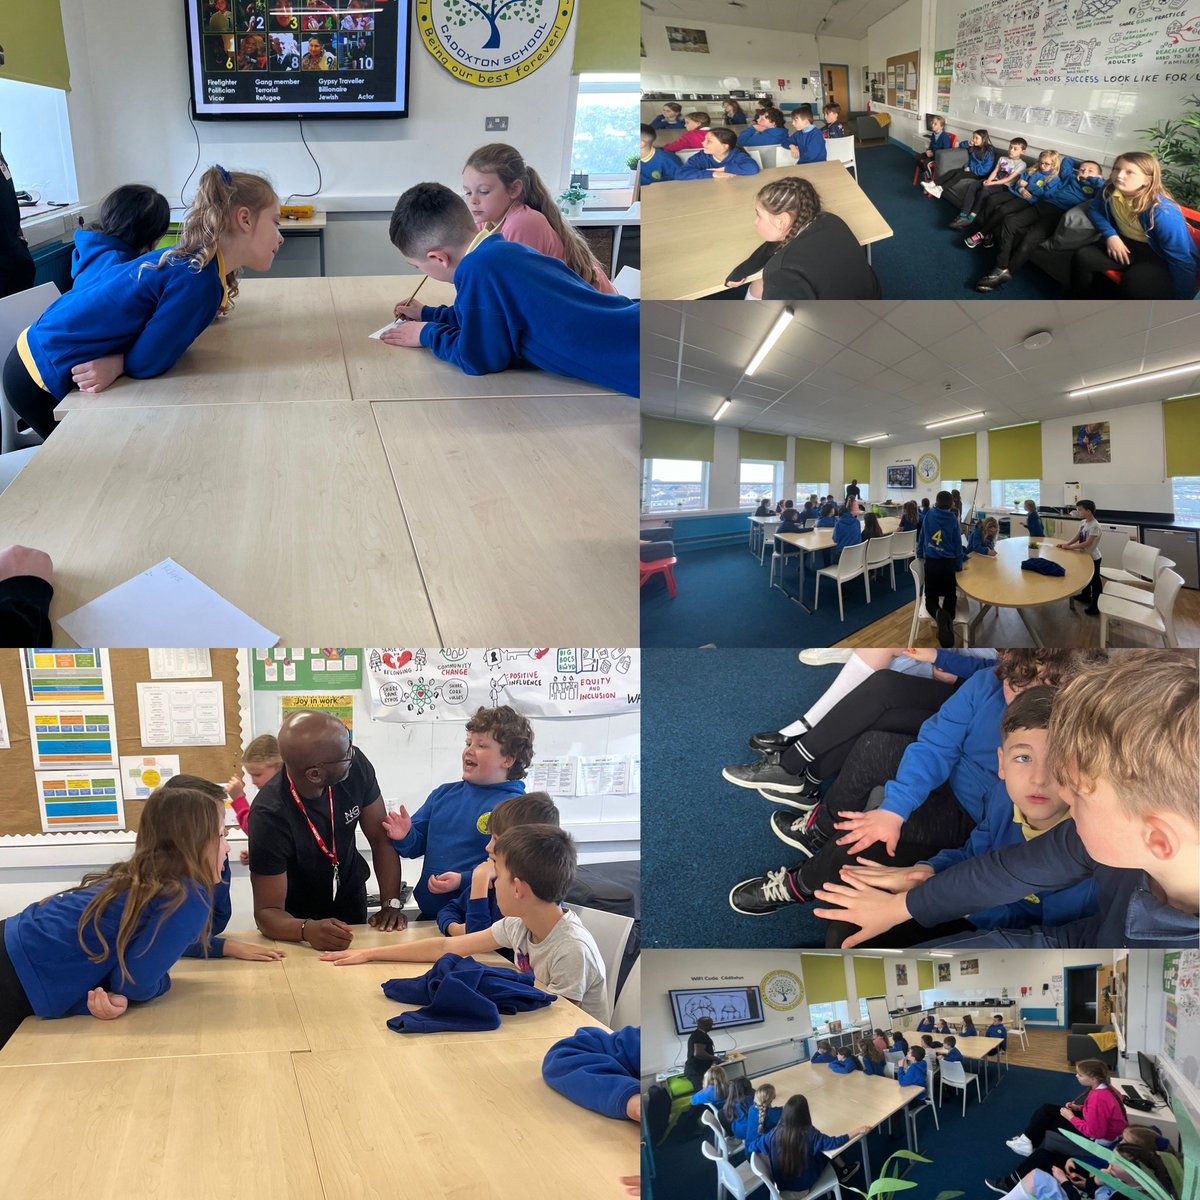 #CPSCleddau attended @NBTCUK Anti-Racism workshop today! A very relevant and impactful workshop! The children enjoyed having conversations and learning all about anti-racism Diolch! #ethicallyinformed #citizensofwales #future #SRTRC